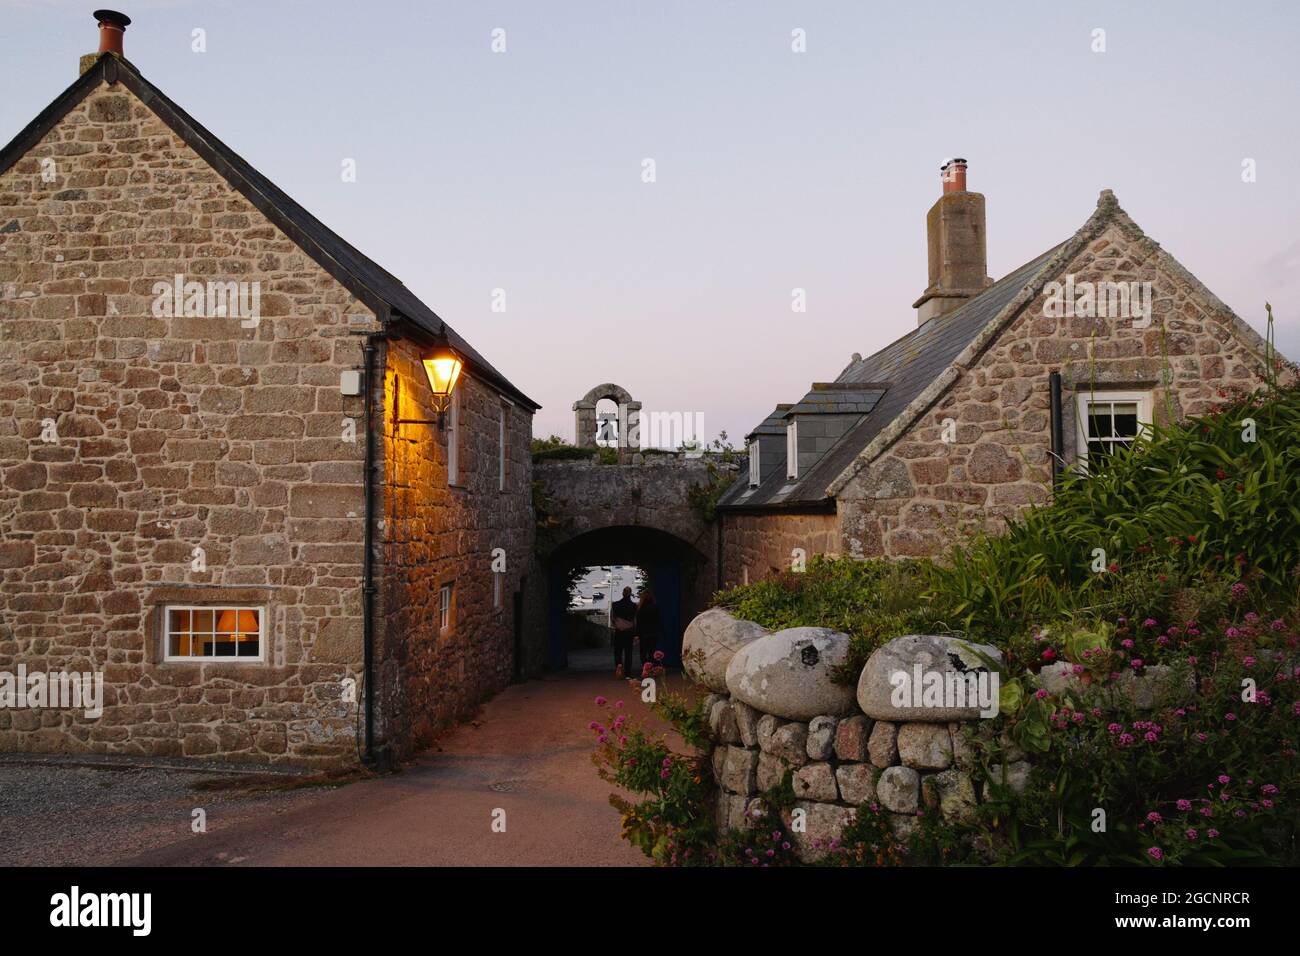 The Gatehouse Cottage on Garrison Hill, Hugh Town, St Mary's island, Isles of Scilly, Cornwall, England, UK, July 2021 Stock Photo